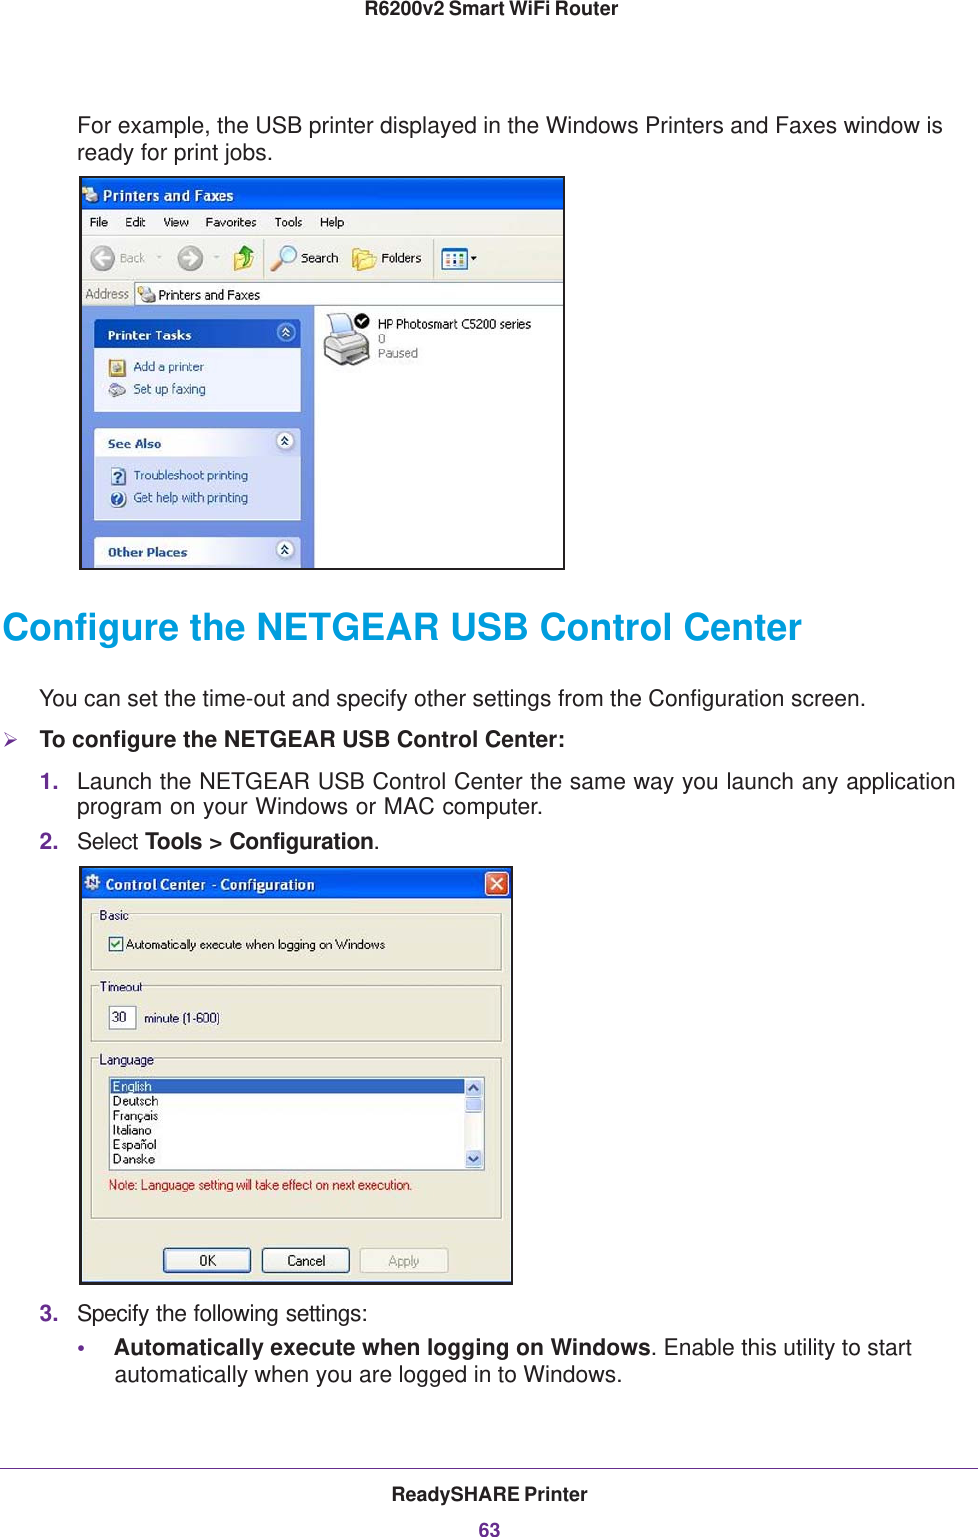 ReadySHARE Printer63 R6200v2 Smart WiFi RouterFor example, the USB printer displayed in the Windows Printers and Faxes window is ready for print jobs.Configure the NETGEAR USB Control CenterYou can set the time-out and specify other settings from the Configuration screen.To configure the NETGEAR USB Control Center:1. Launch the NETGEAR USB Control Center the same way you launch any application program on your Windows or MAC computer.2. Select Tools &gt; Configuration.3. Specify the following settings:•Automatically execute when logging on Windows. Enable this utility to start automatically when you are logged in to Windows.